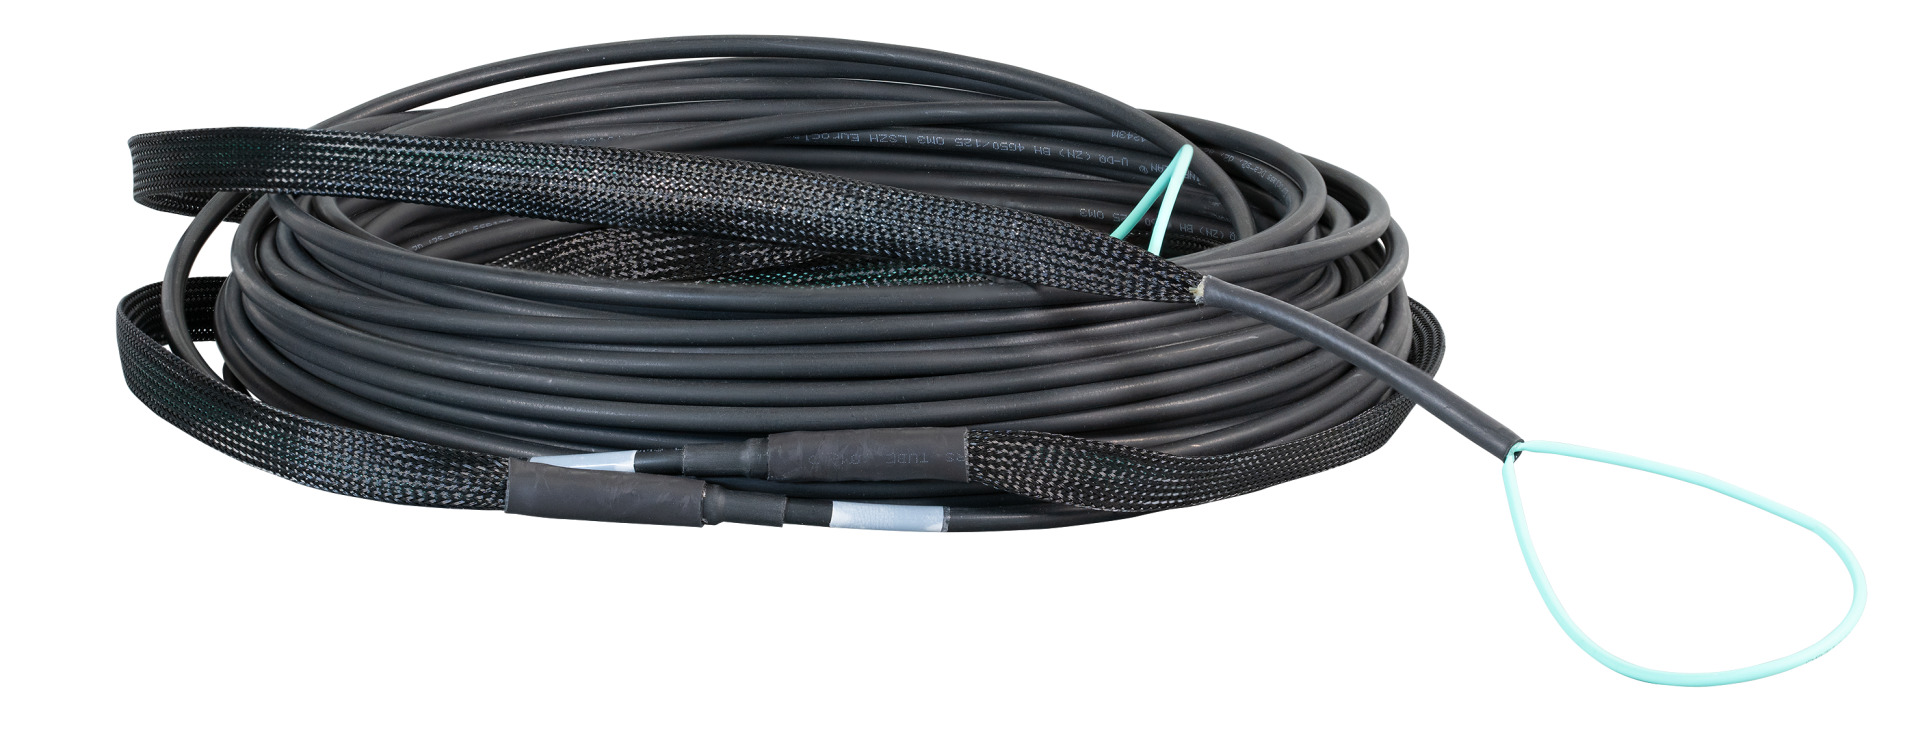 Trunk cable U-DQ(ZN)BH 8G 50/125, LC/LC OM3 160m